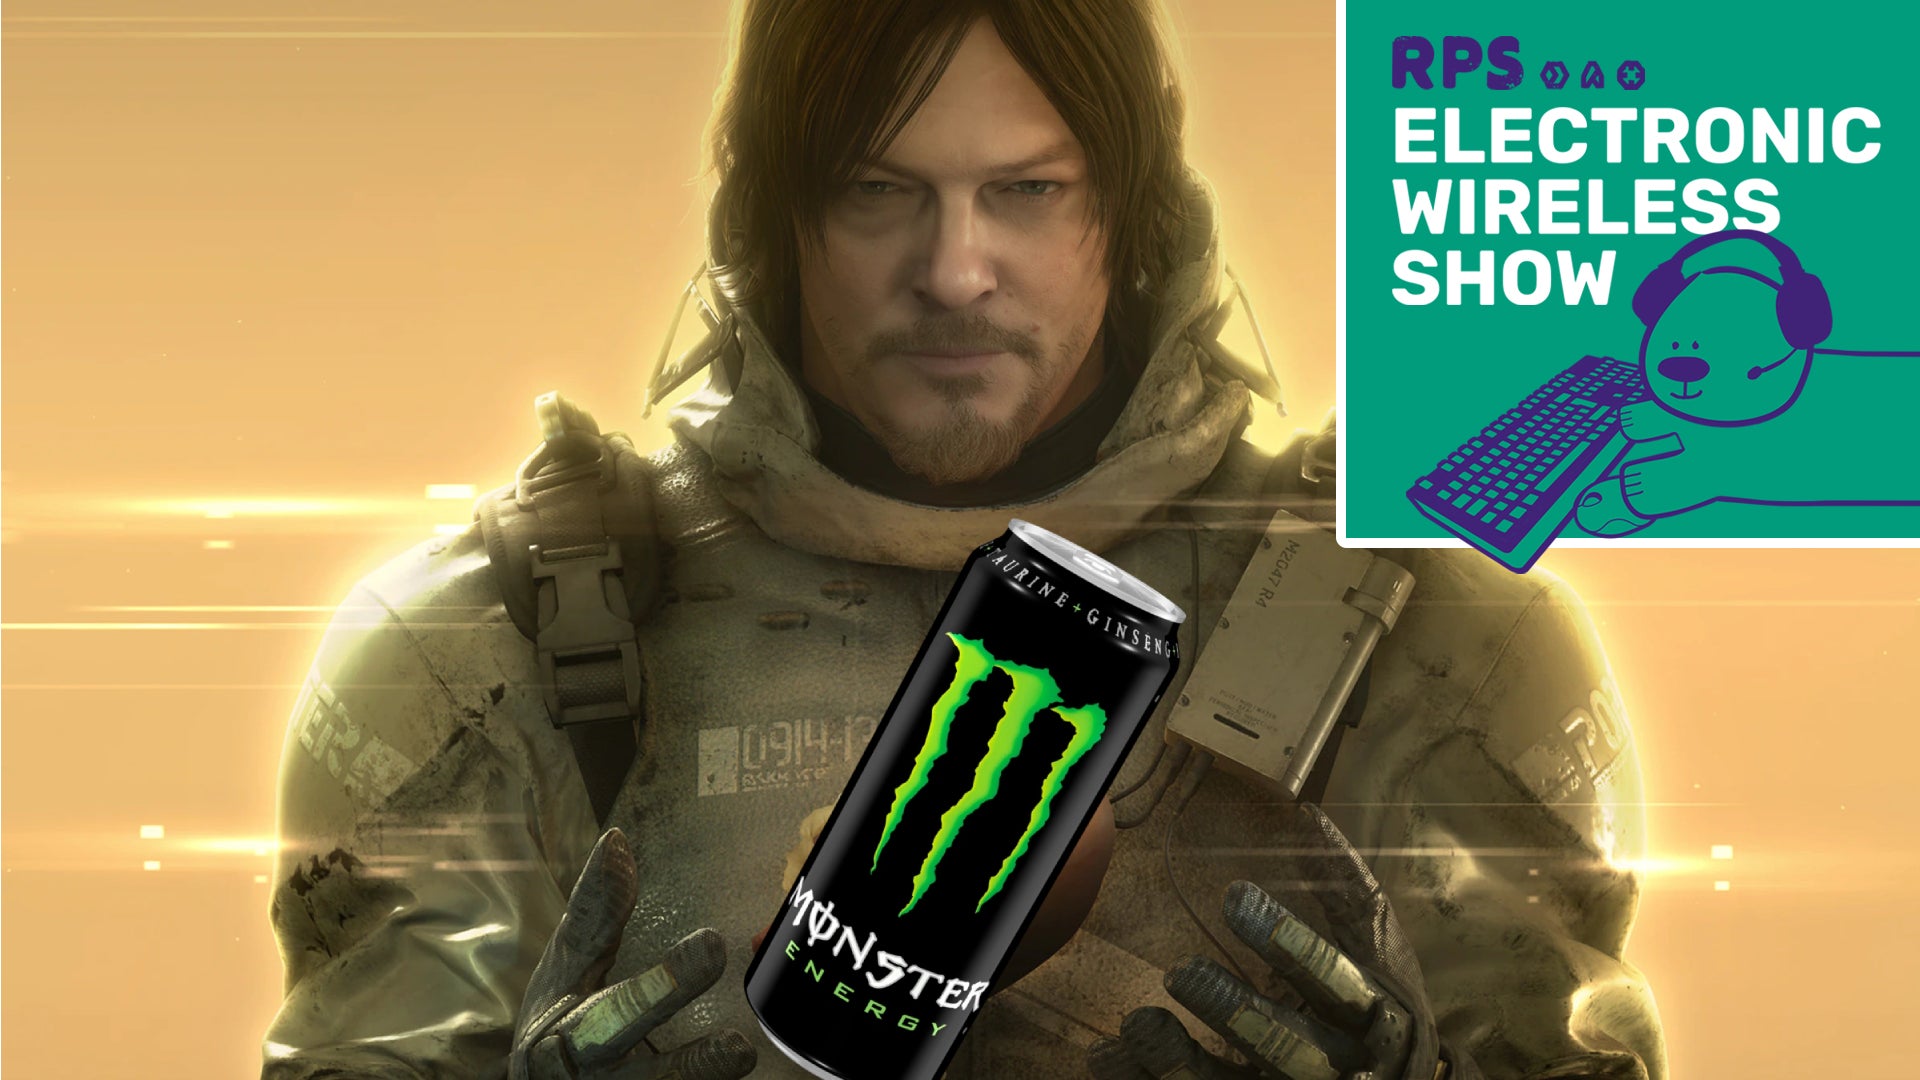 A screenshot of Norman Reedus's character Sam Porter Bridges from Death Stranding, looking at the camera with hands raised - but between those hands, instead of a baby, is a can of monster energy drink. The Electronic Wireless Show podcast logo is superimposed on the top right corner of the image